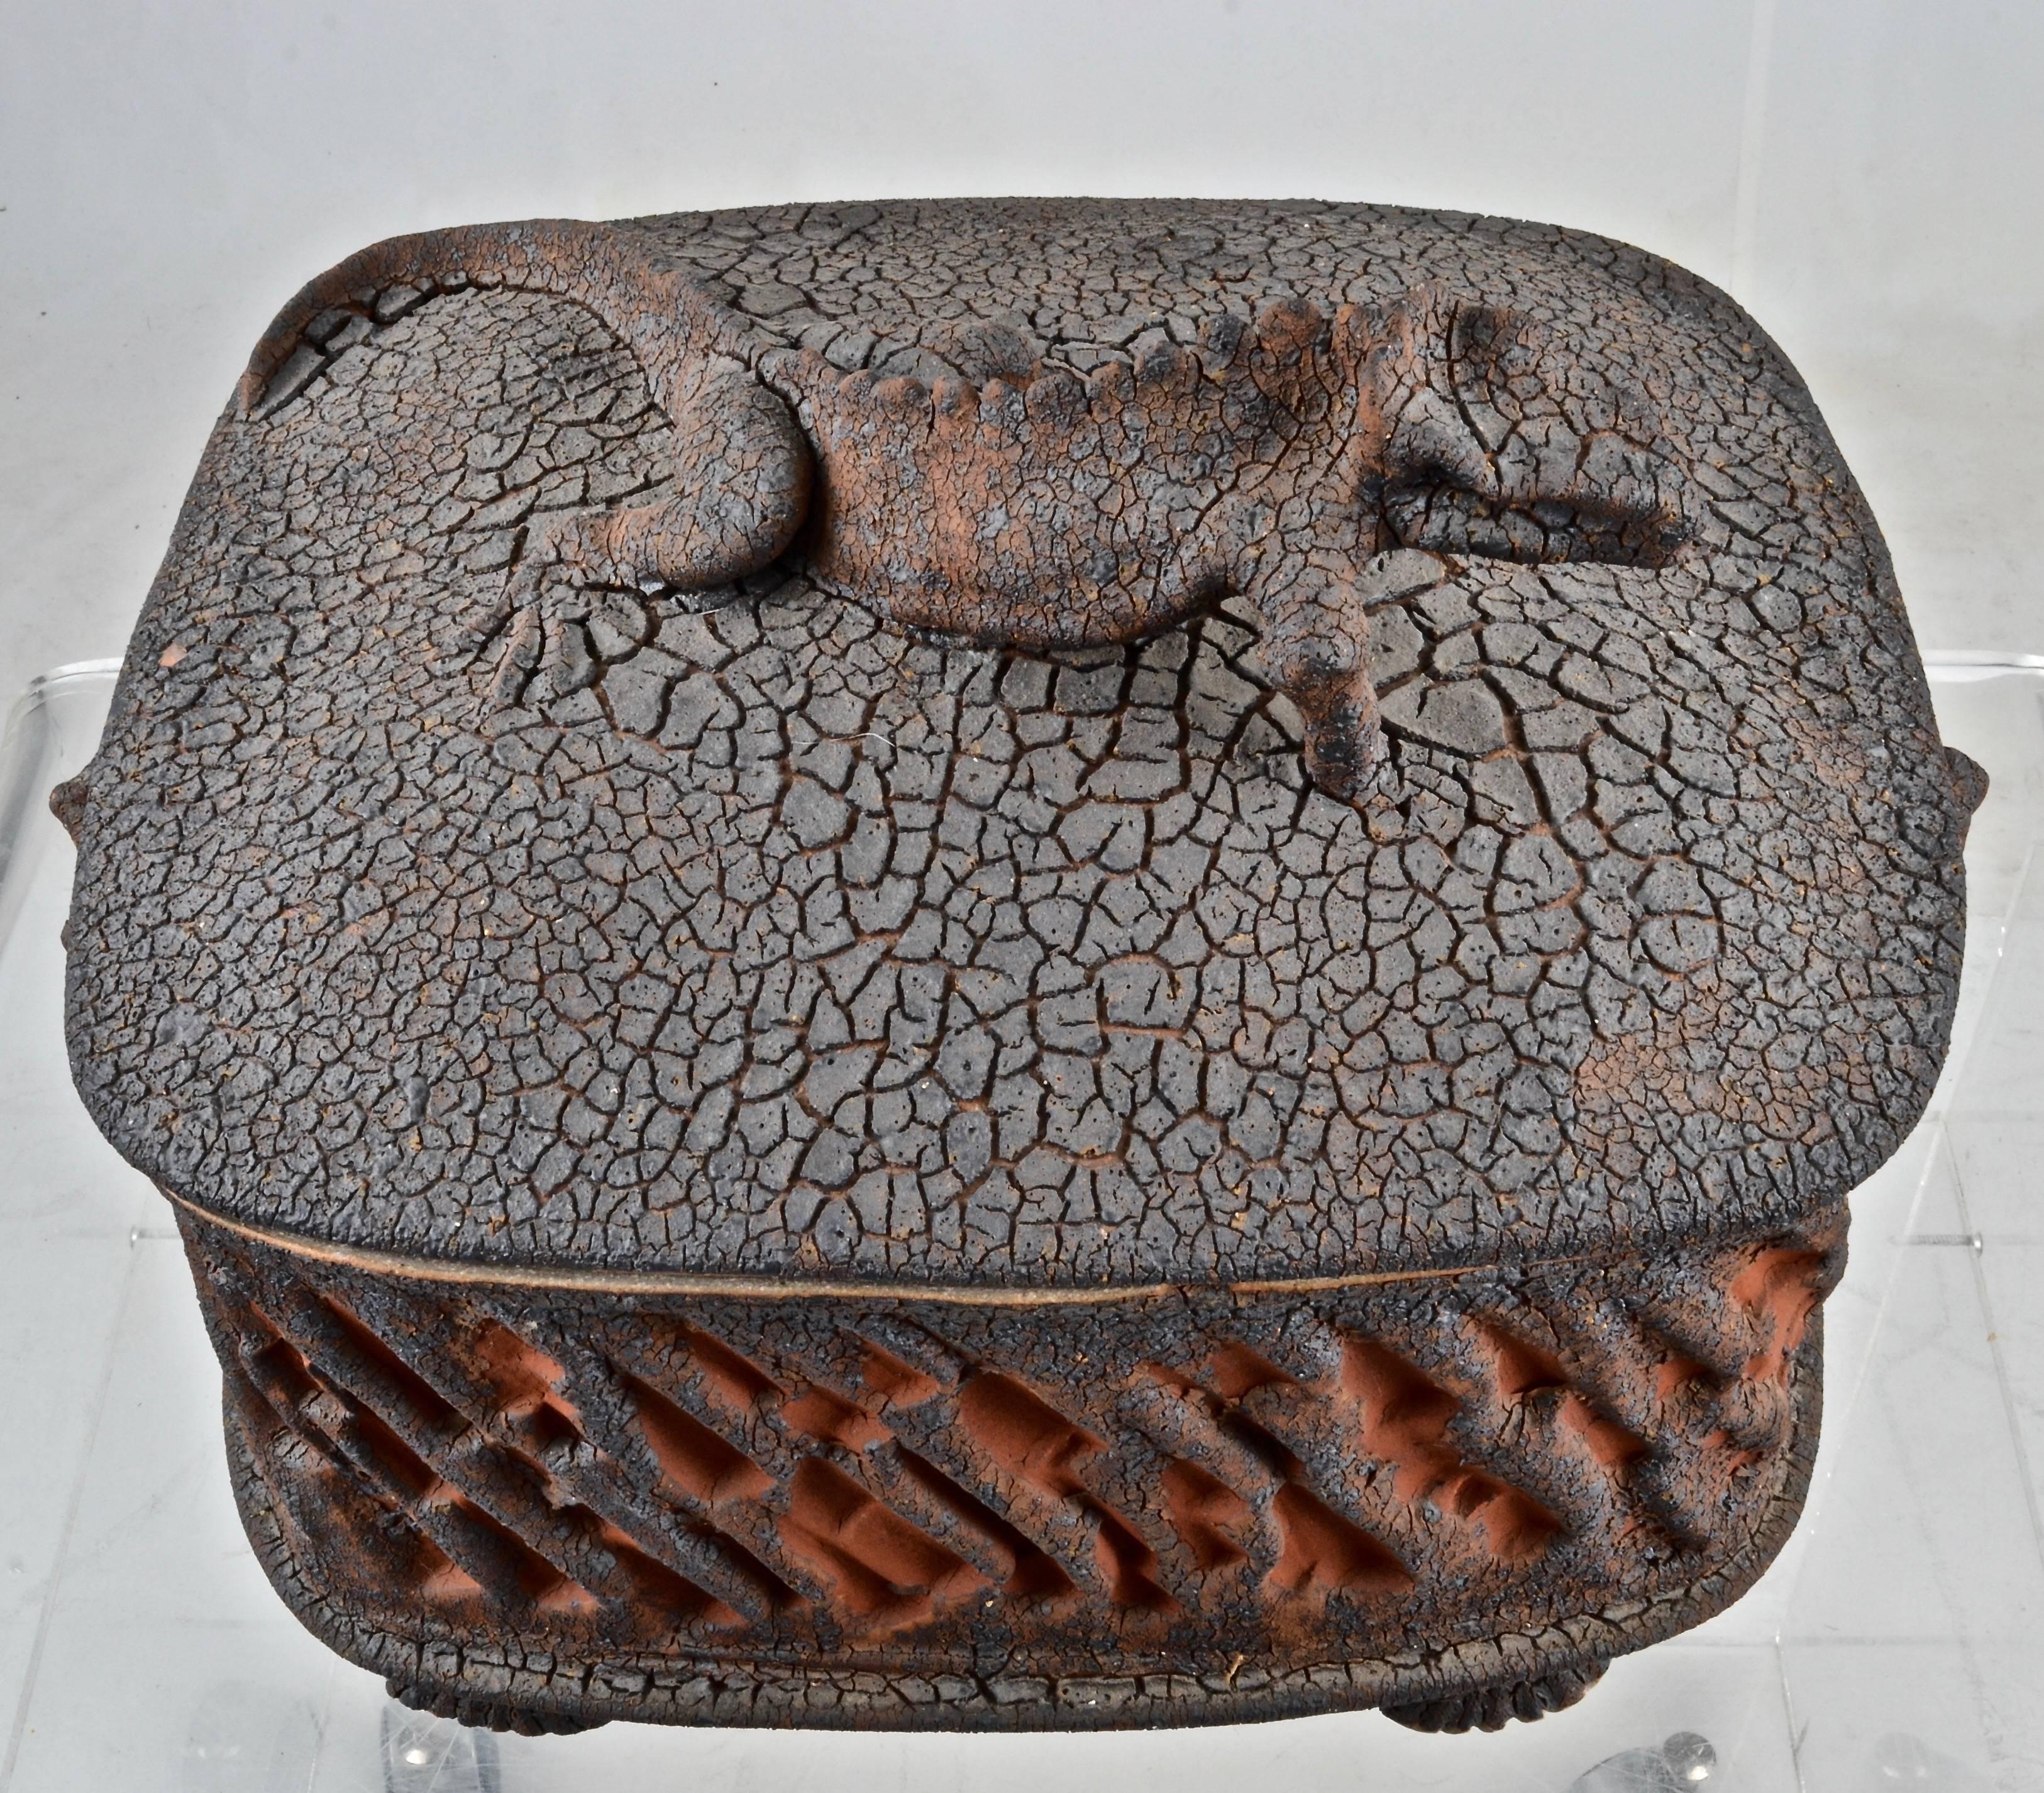 This is an outstanding art pottery work by Charles Gluskoter featuring a lifesize dessert lizard atop a heavily textured lid. Raised faux bois design on sides. The inside of the box/tureen is glazed black. Impressive size at 16 inches wide by 12